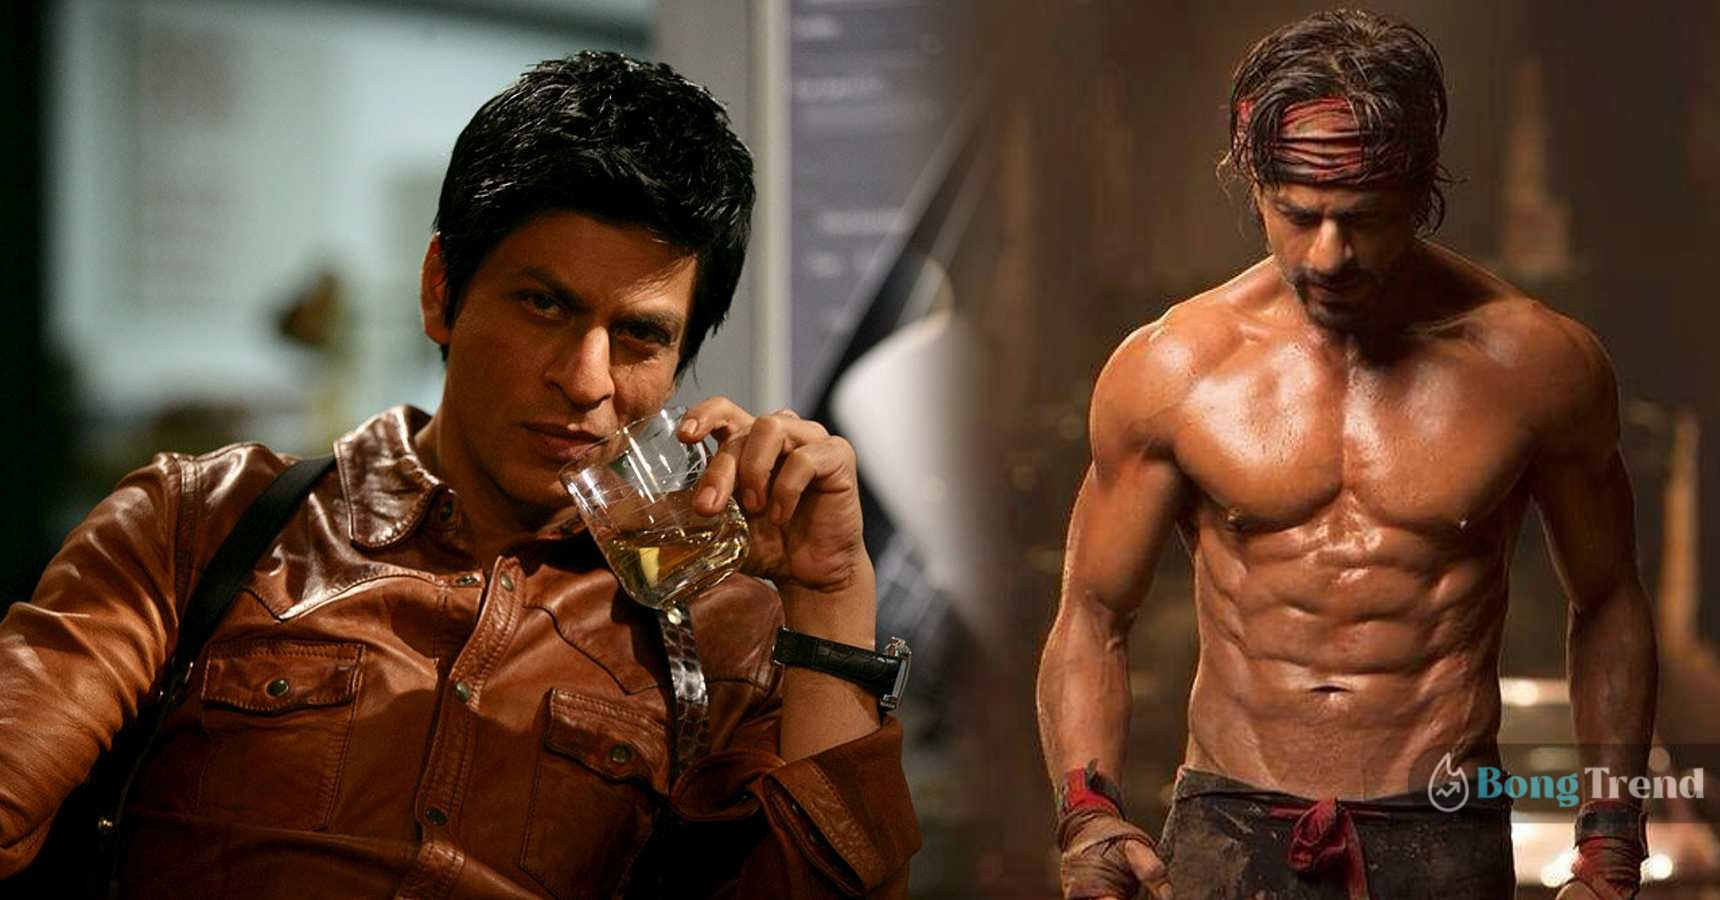 Shahrukh Khan 8 Pack Body Pathaan movie looks Leaked Photos